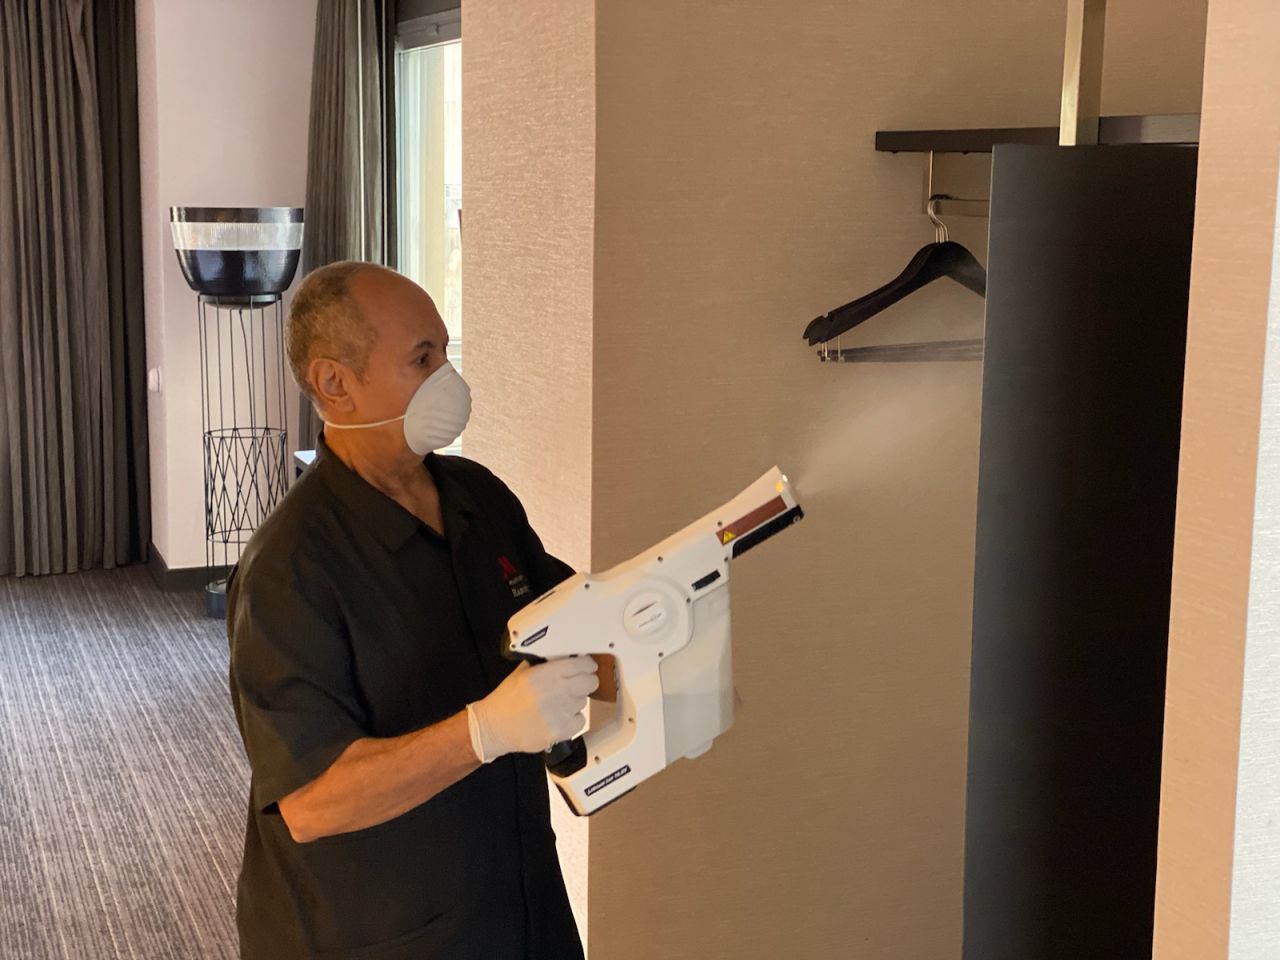 Hotel chains have upped their disinfecting measures. Experts advise steering clear of common areas.